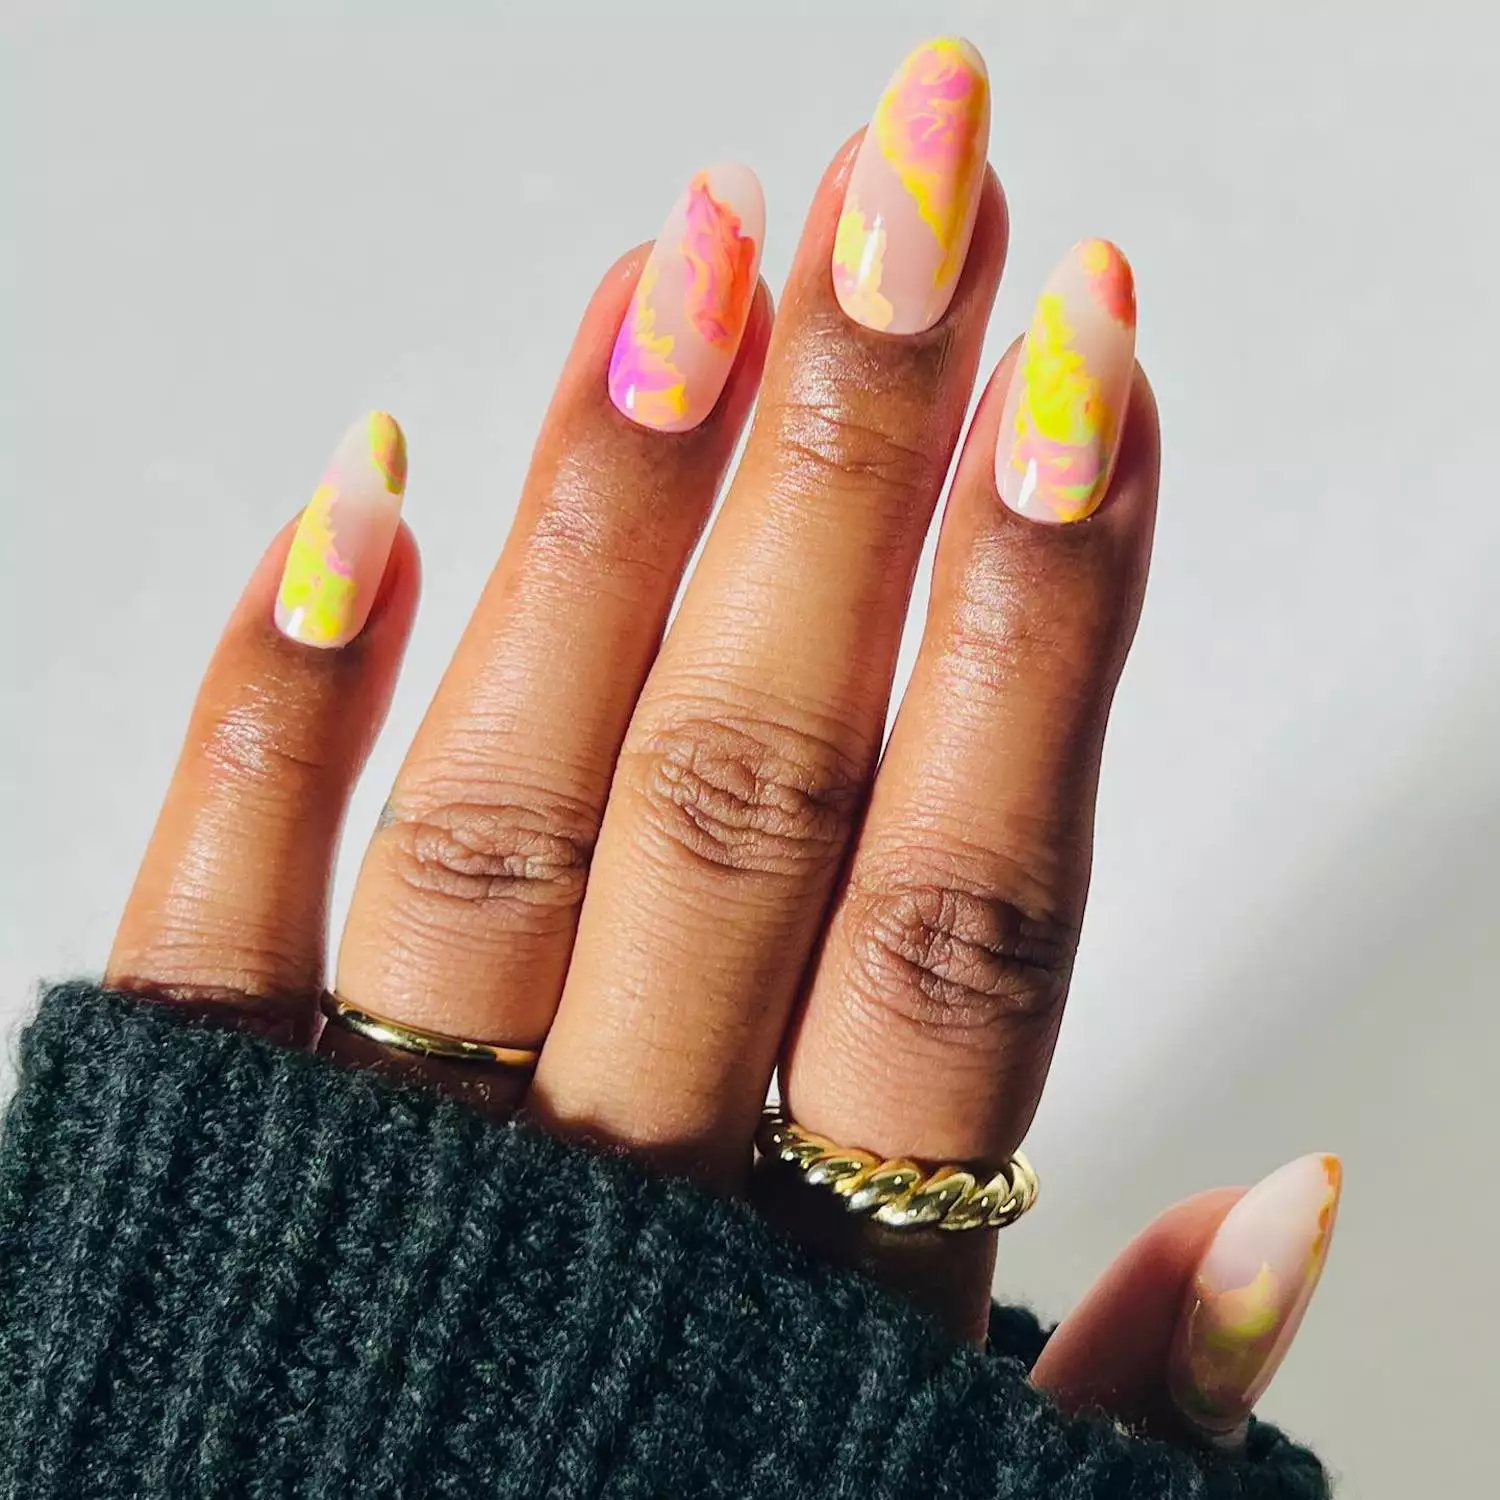 Marbled pink and yellow manicure on translucent neutral base